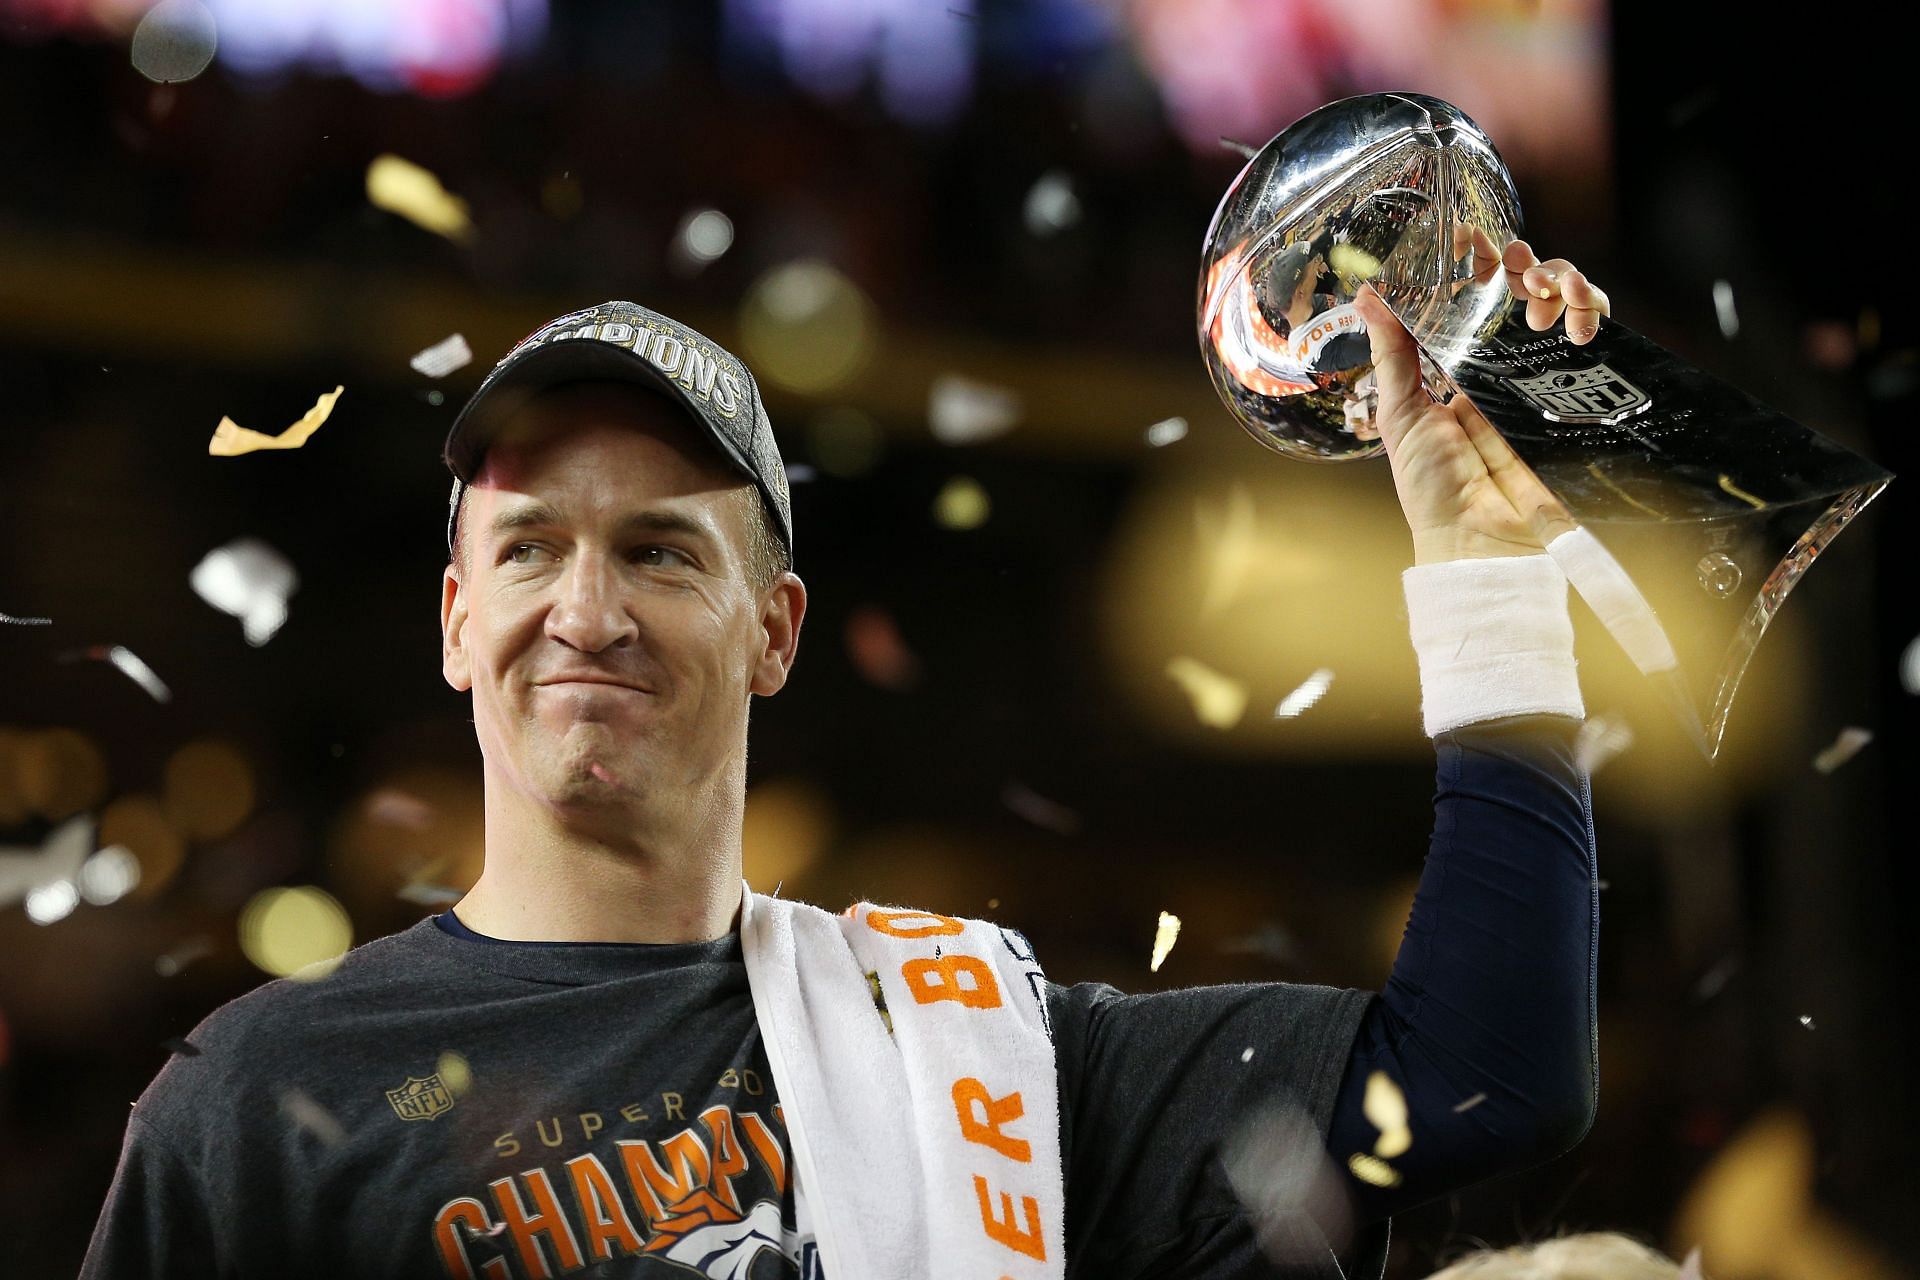 Peyton Manning lifting the Vince Lombardi trophy